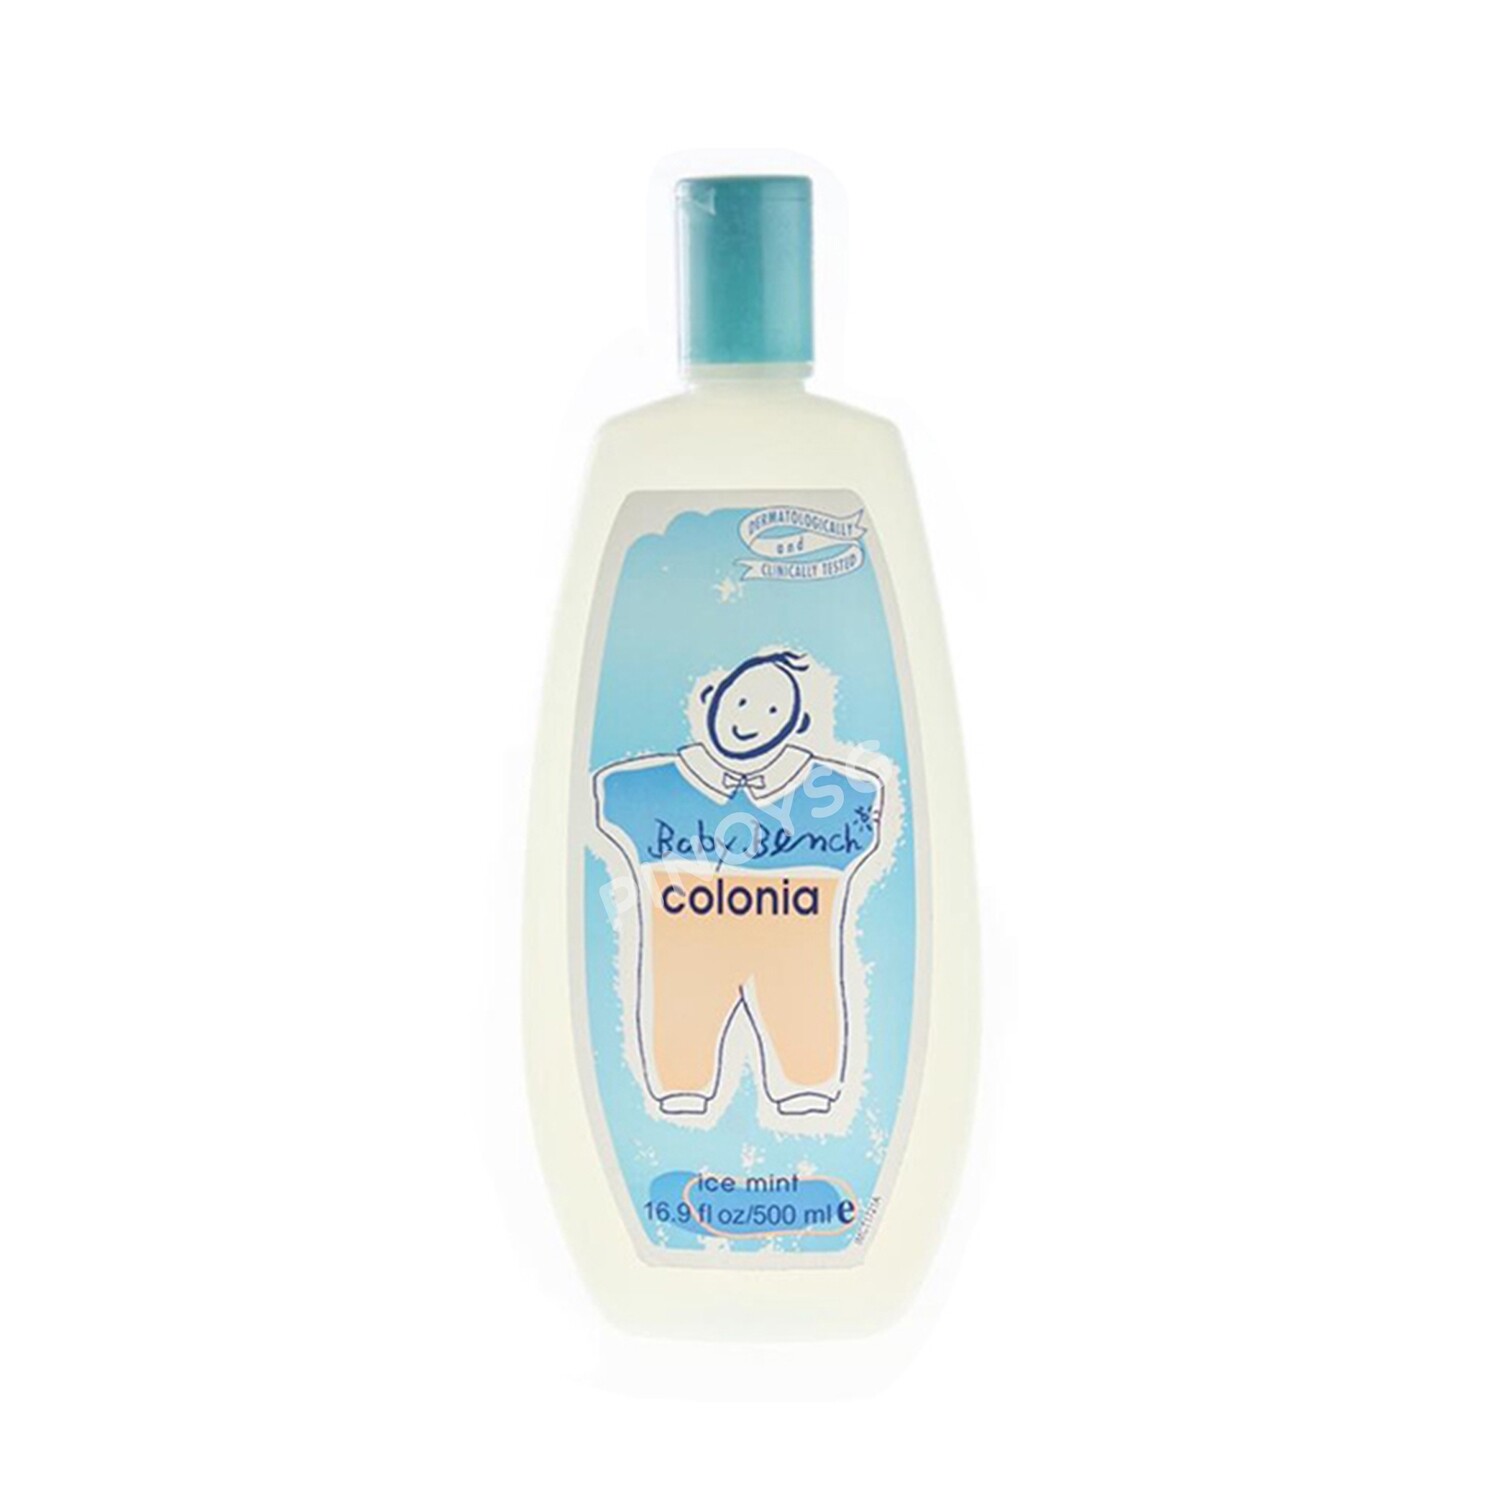 Baby Bench Cologne Ice Mint 200ml